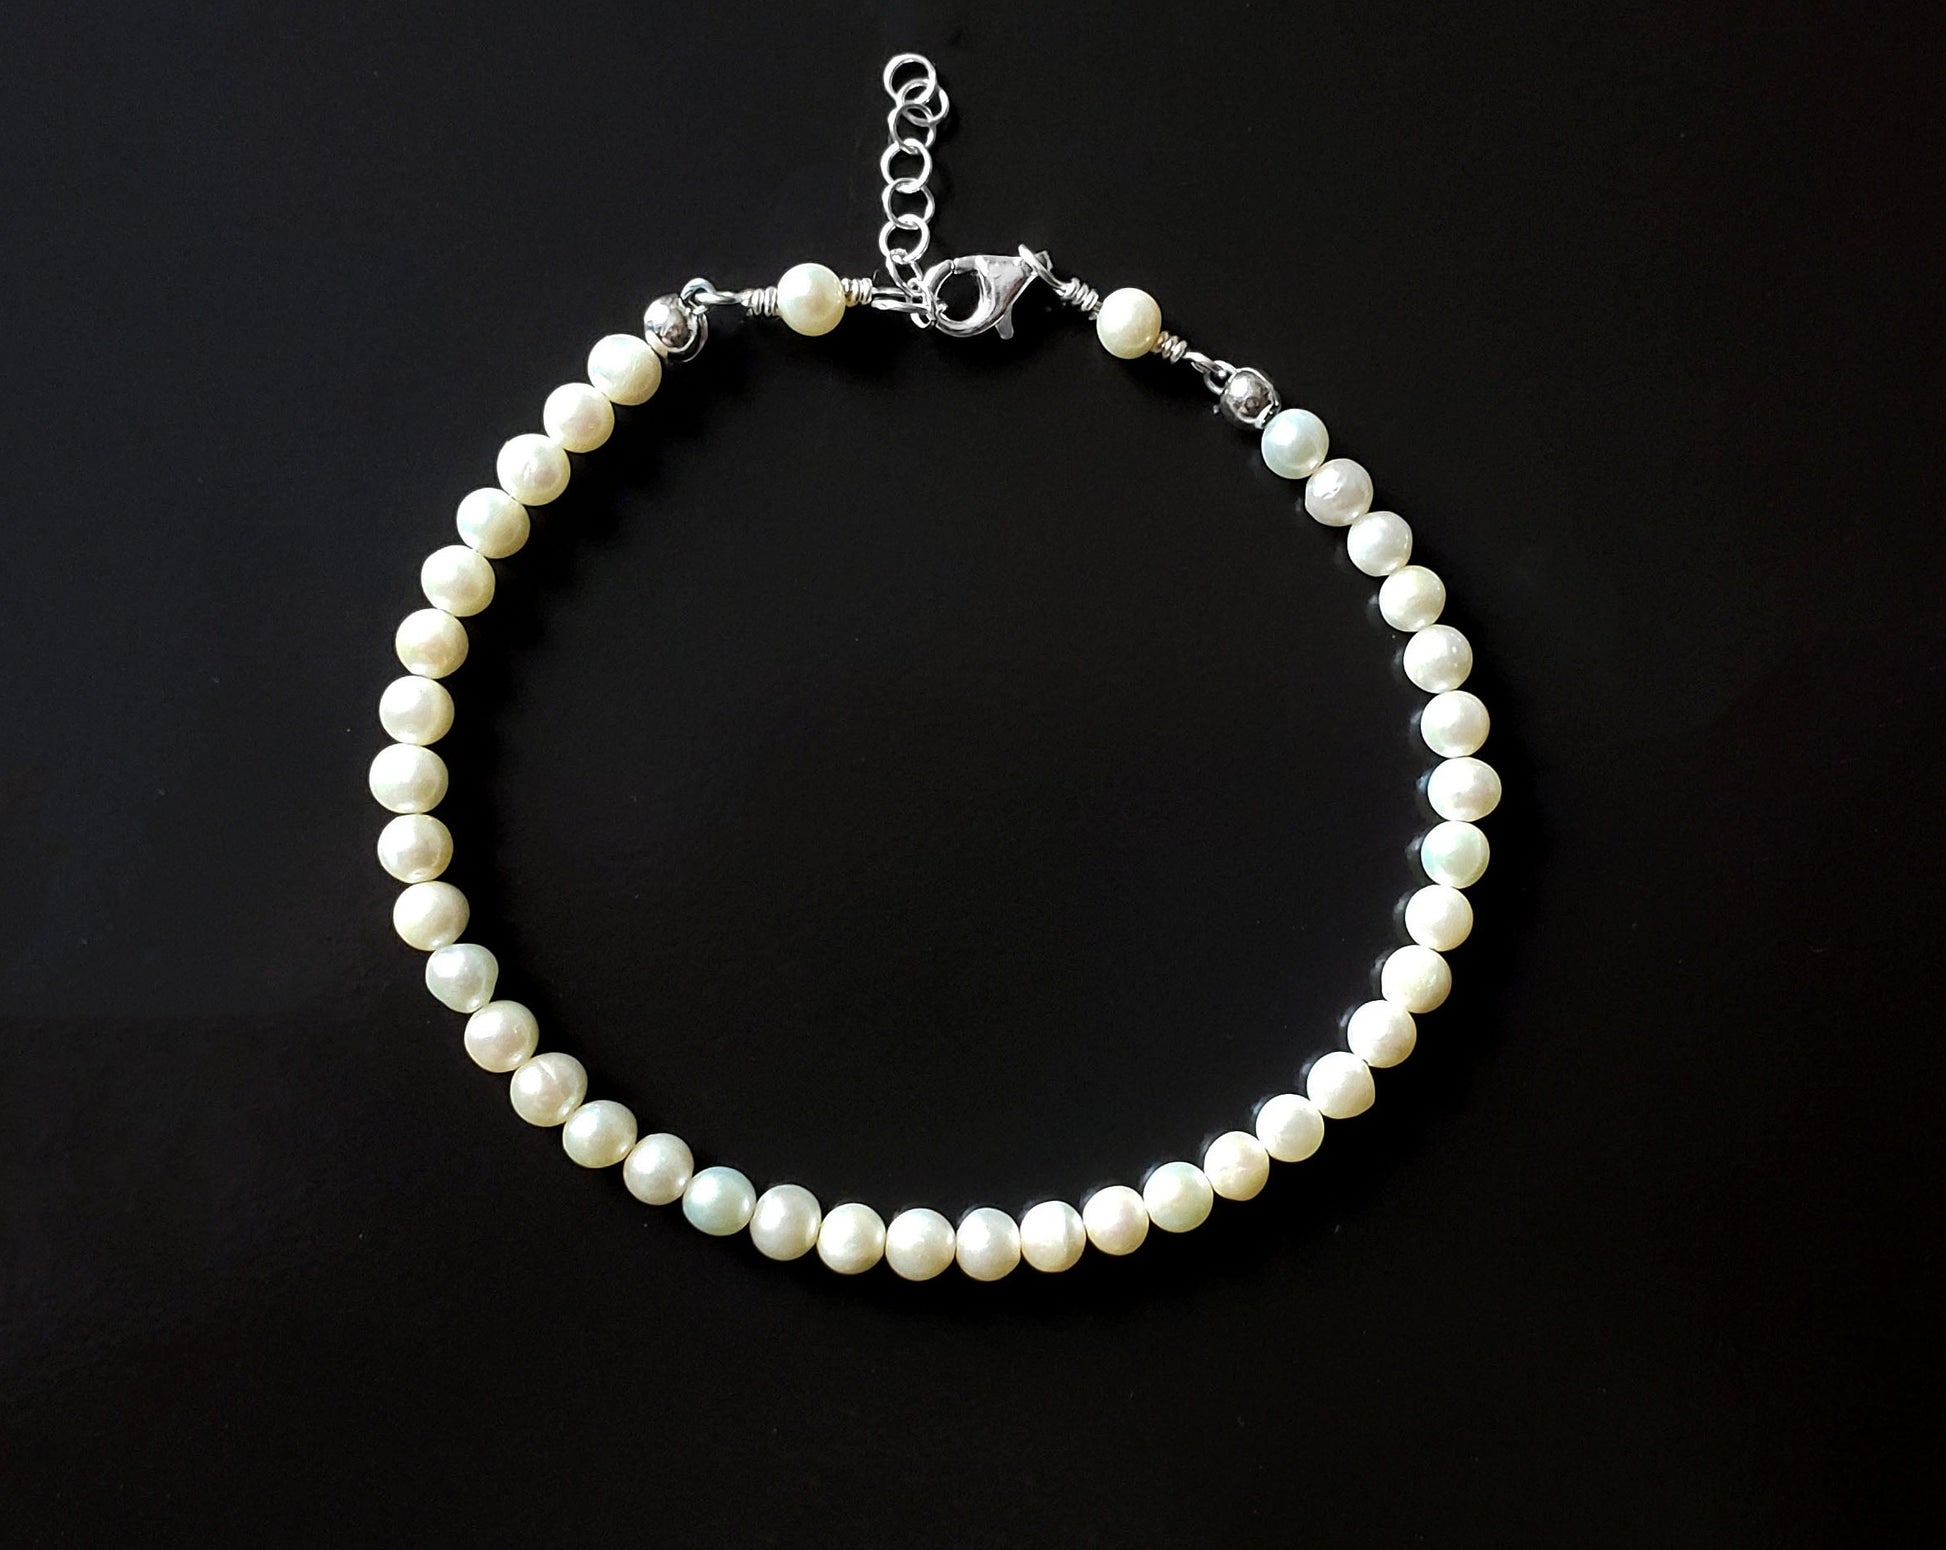 Genuine Pearl Anklet-Ankle Bracelet-Handcrafted-High Quality White Freshwater Cultured Pearls-925 Sterling Silver